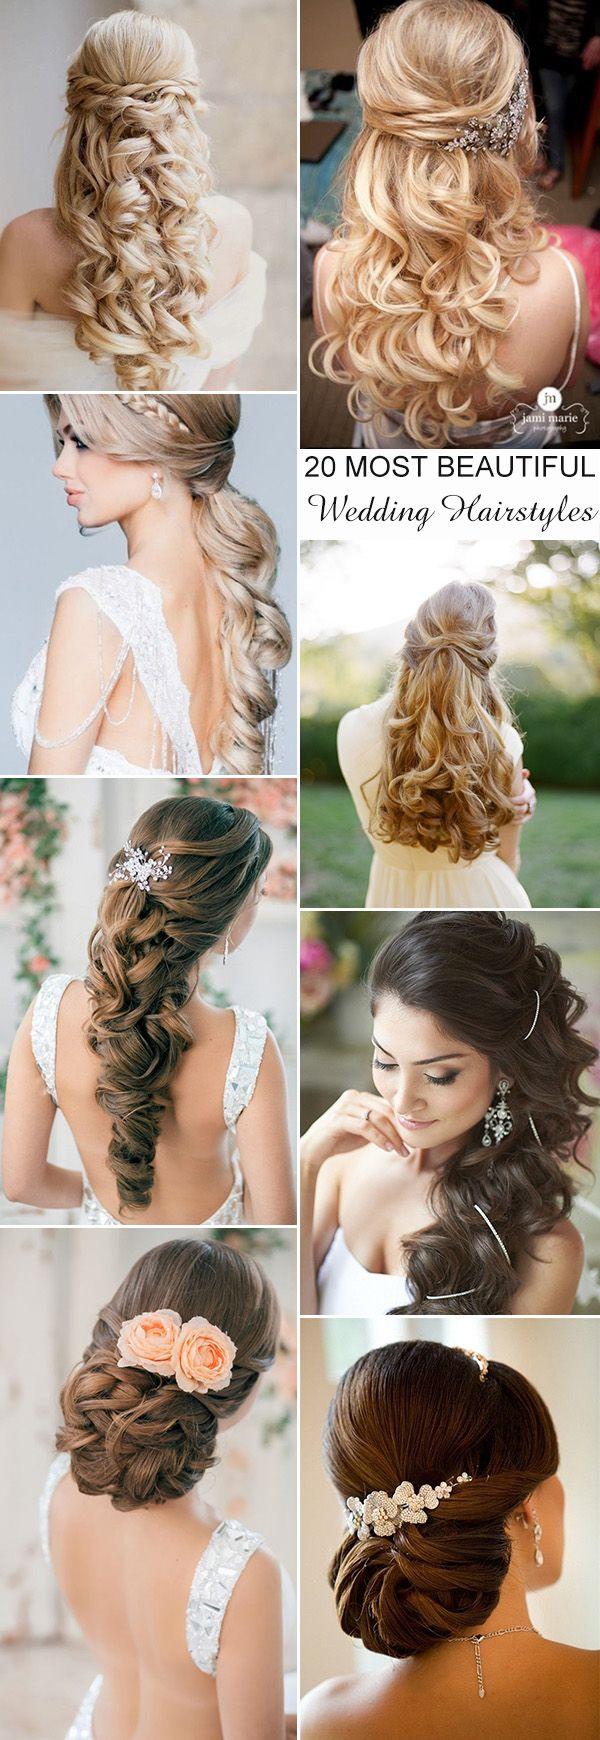 Mariage - 20 Most Elegant And Beautiful Wedding Hairstyles